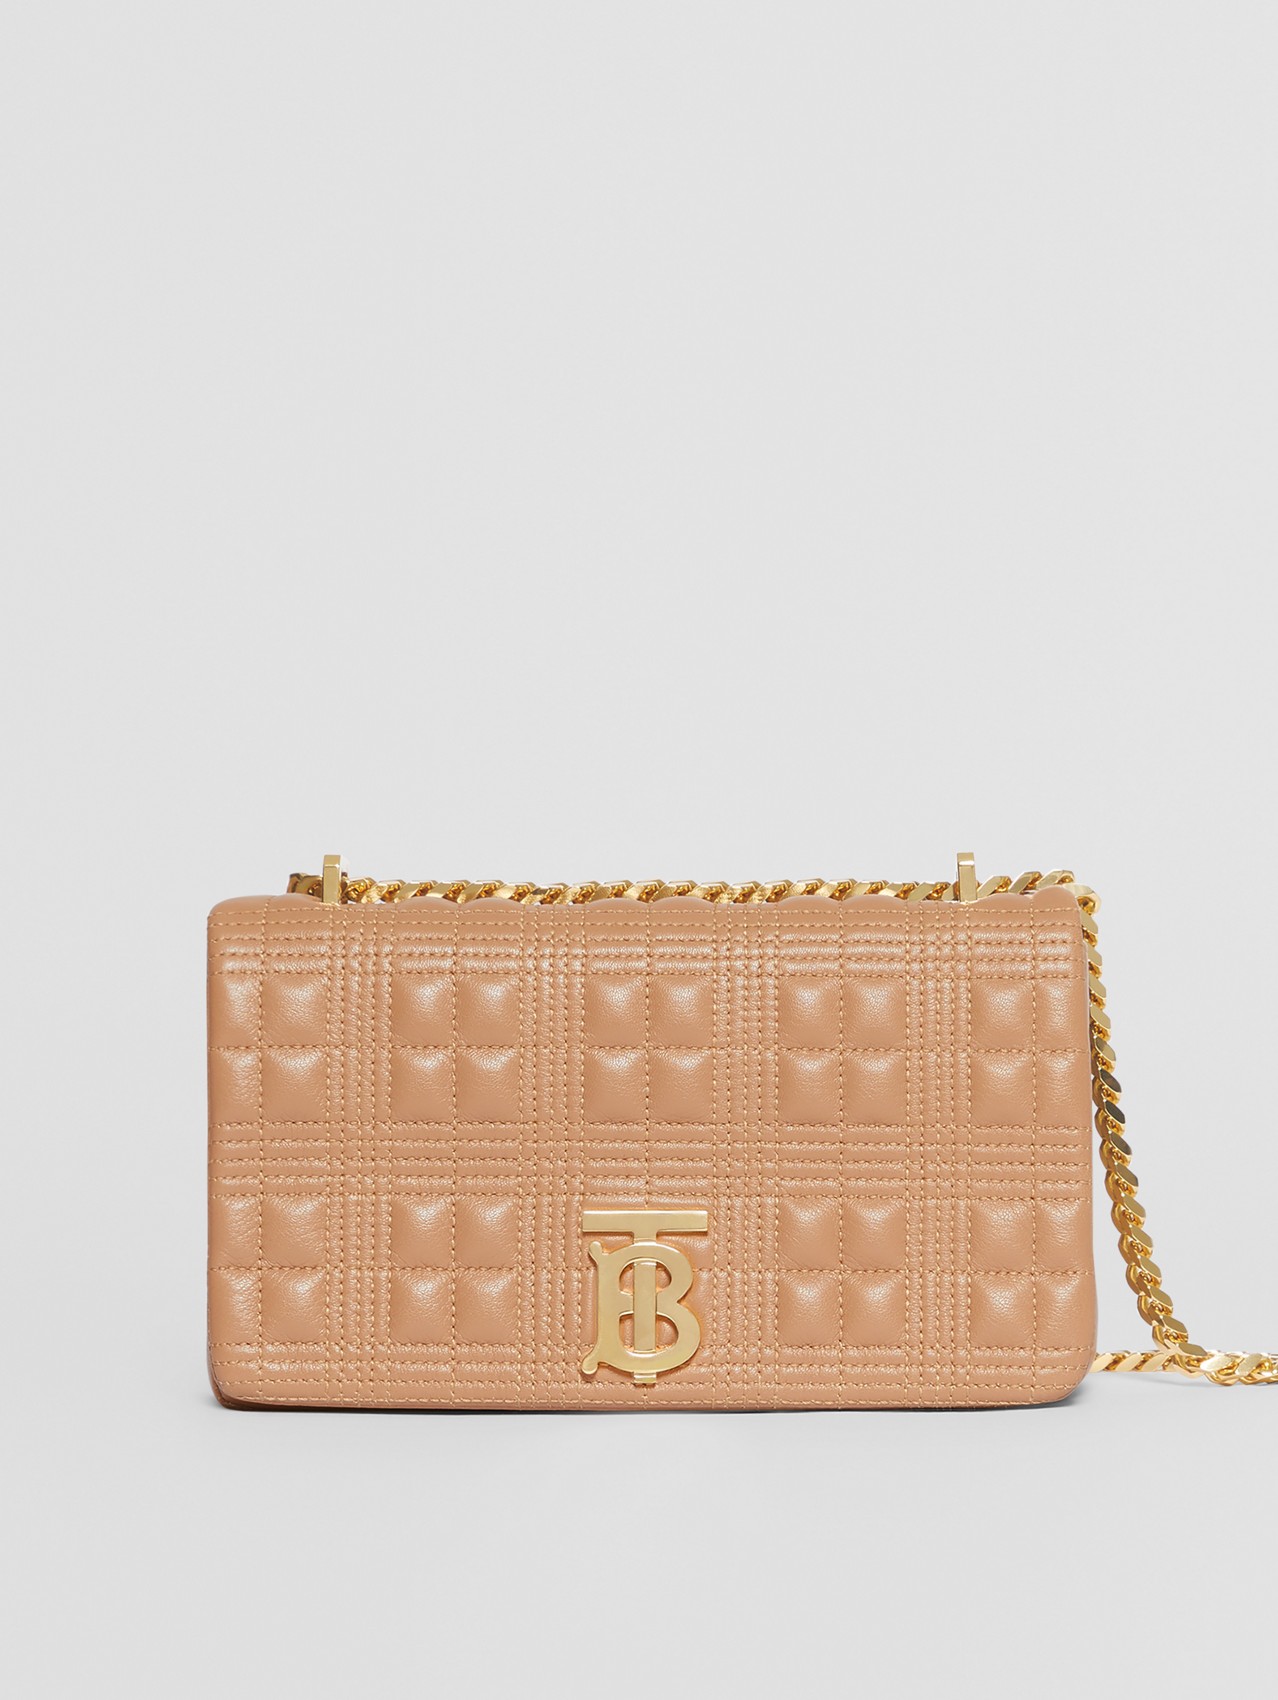 Small Quilted Lambskin Lola Bag in Camel/light Gold